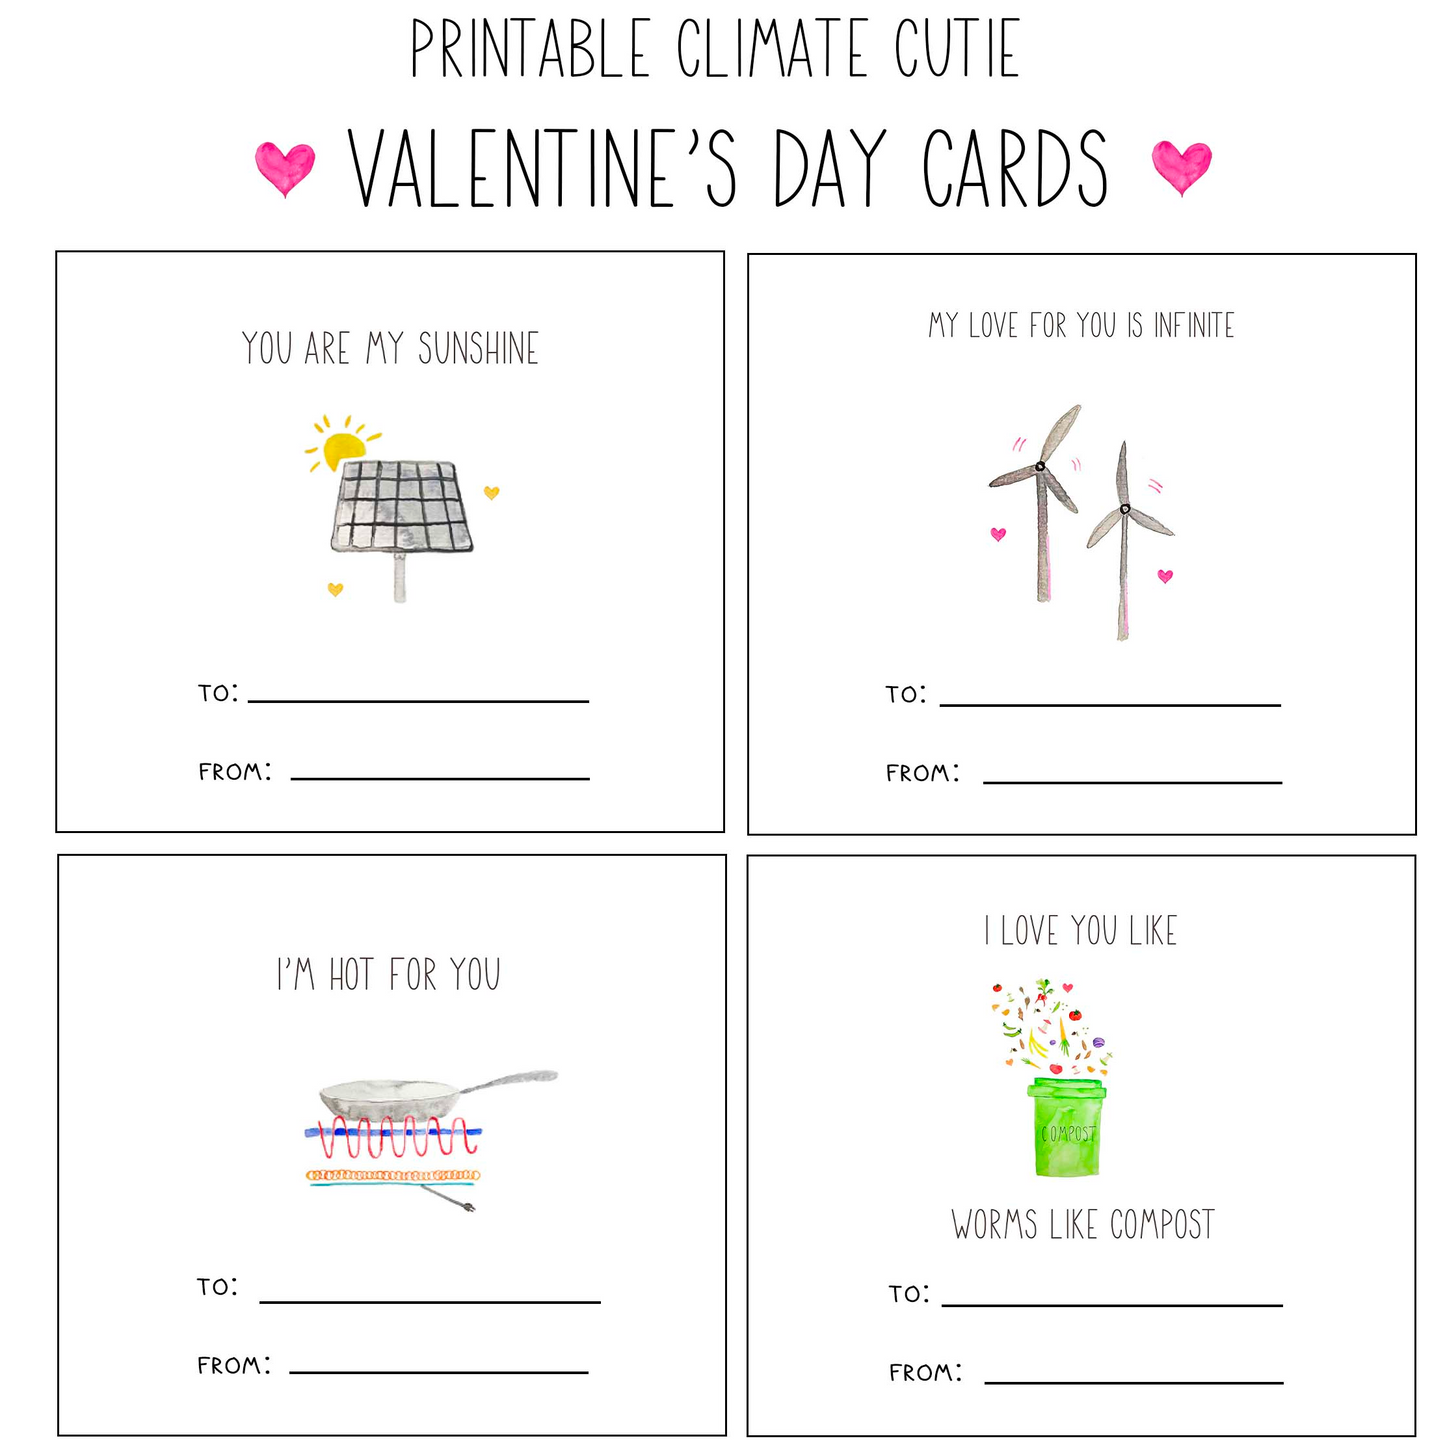 Valentine's Day Climate Cutie Cards- Digital Download